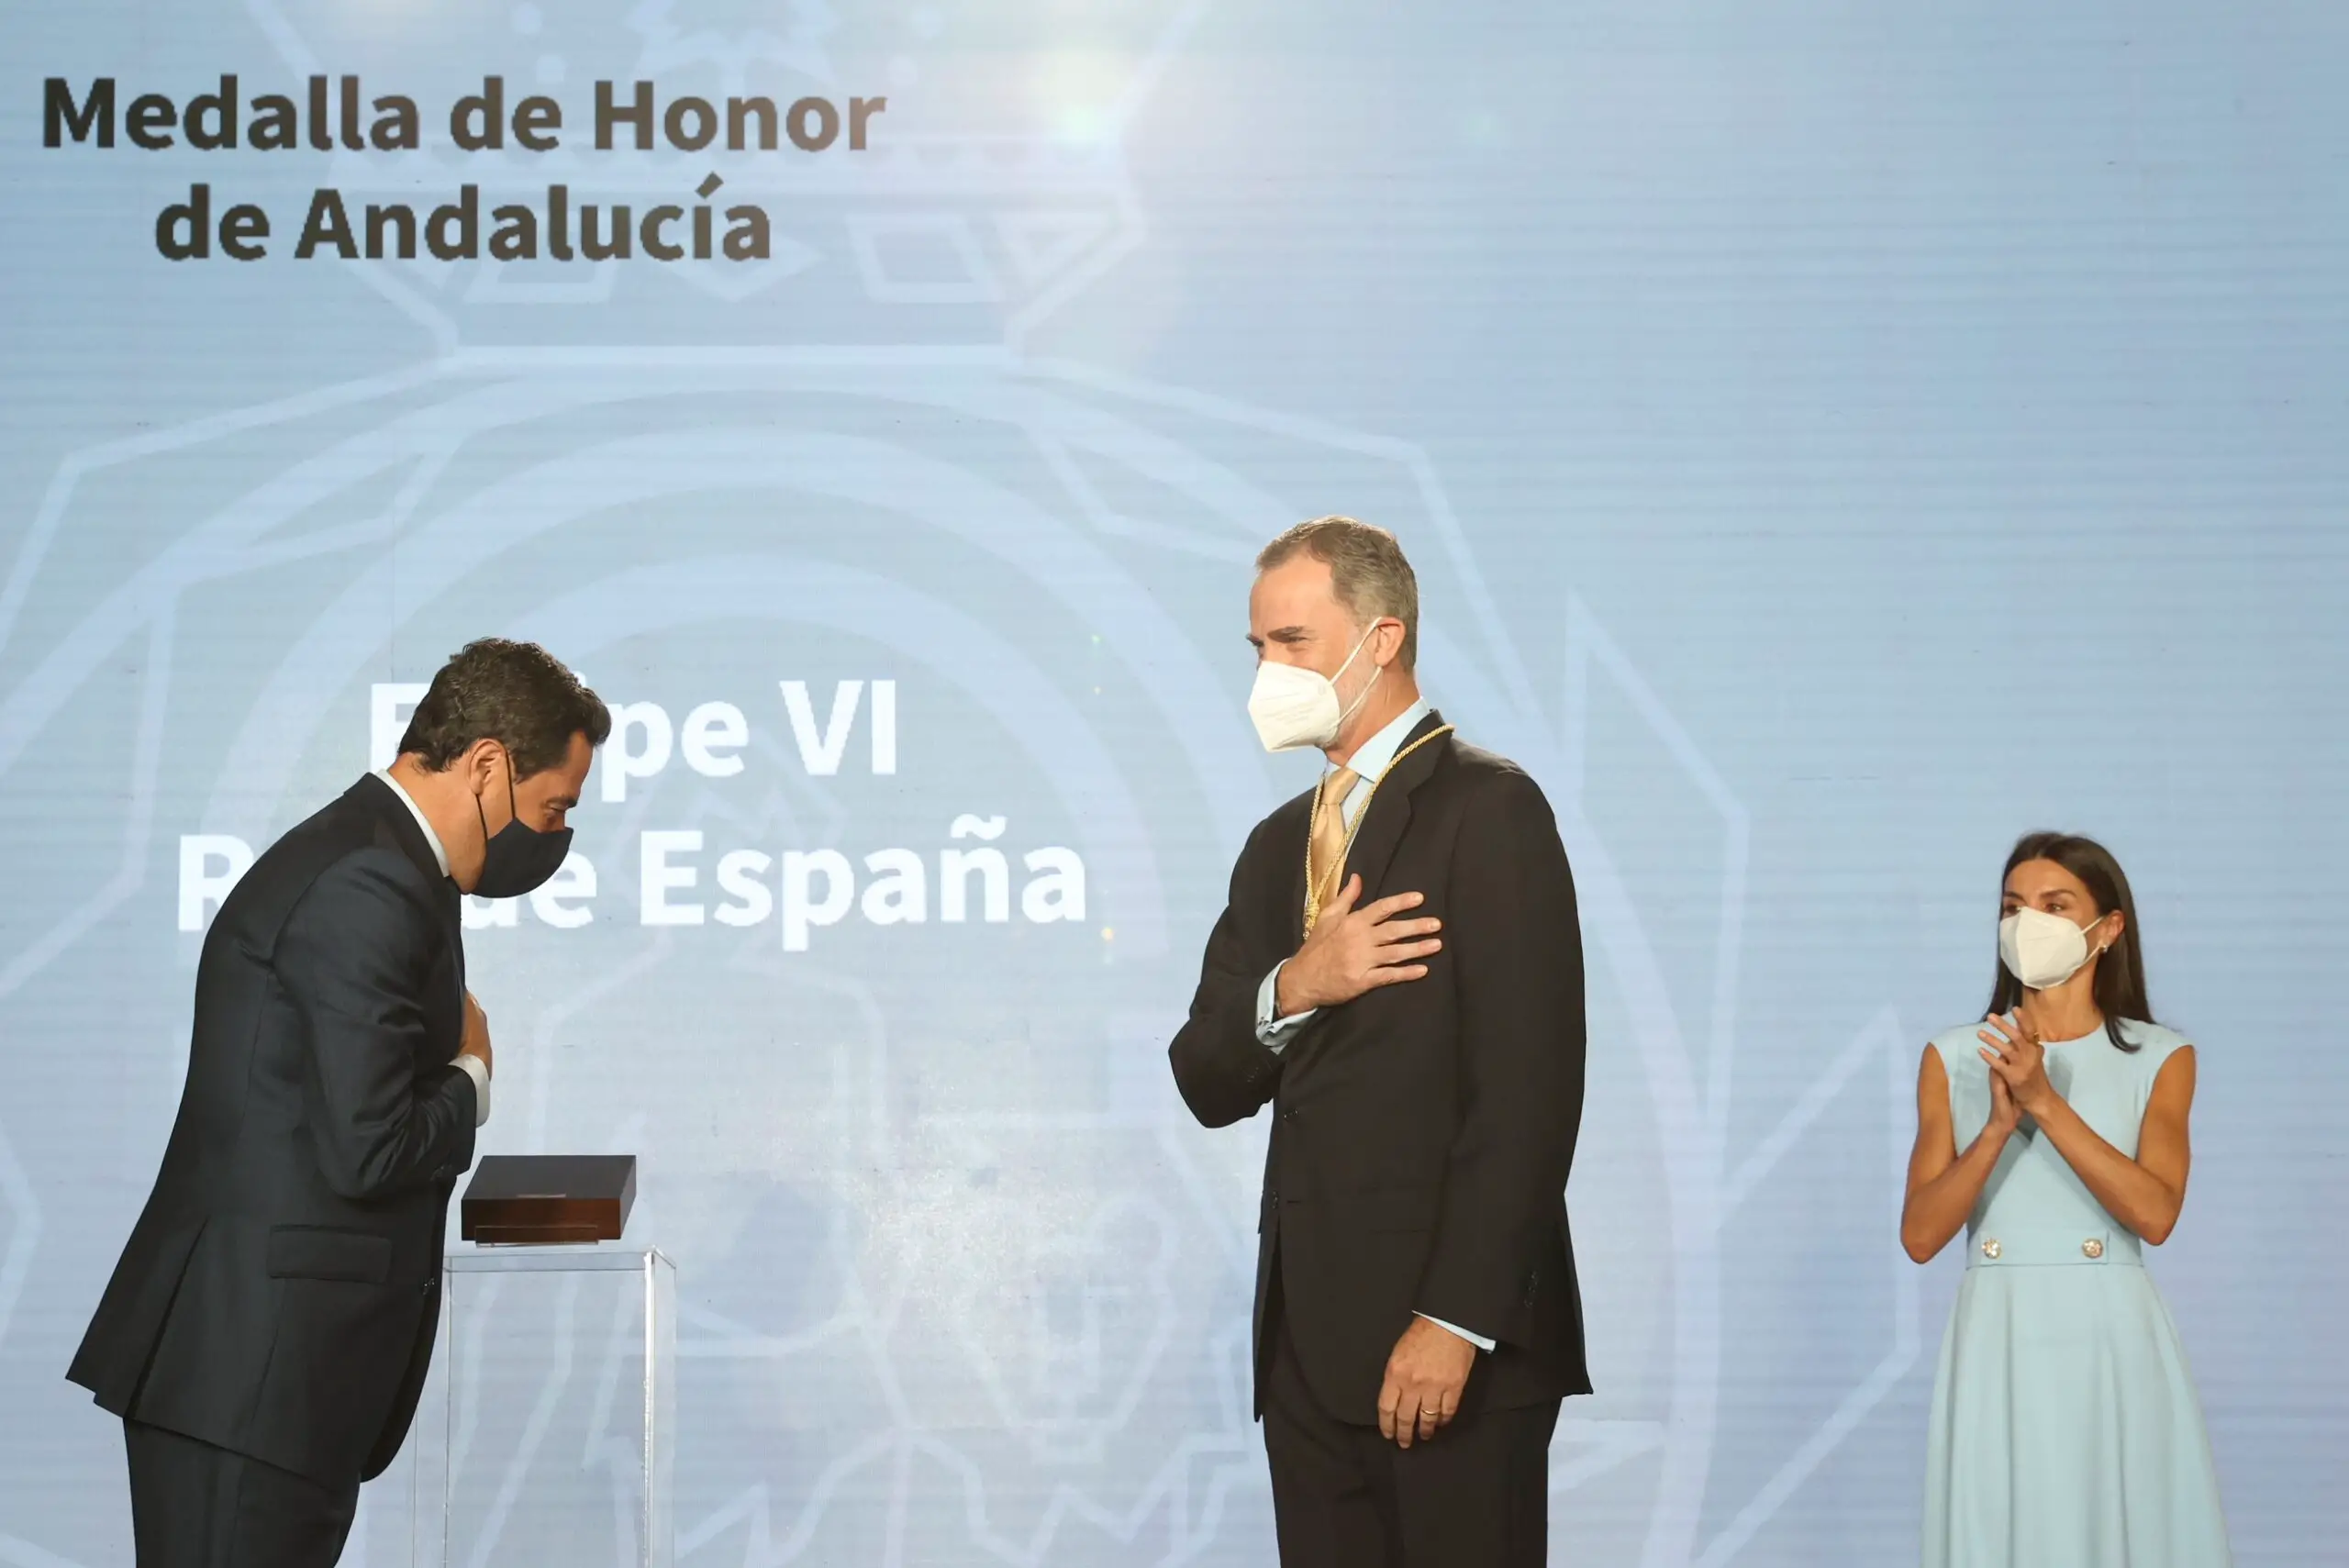 The first Medal of Honor of Andalusia was awarded by the Andalusian Government to King Felipe VI for constituting a solid bond between Andalusia and the State